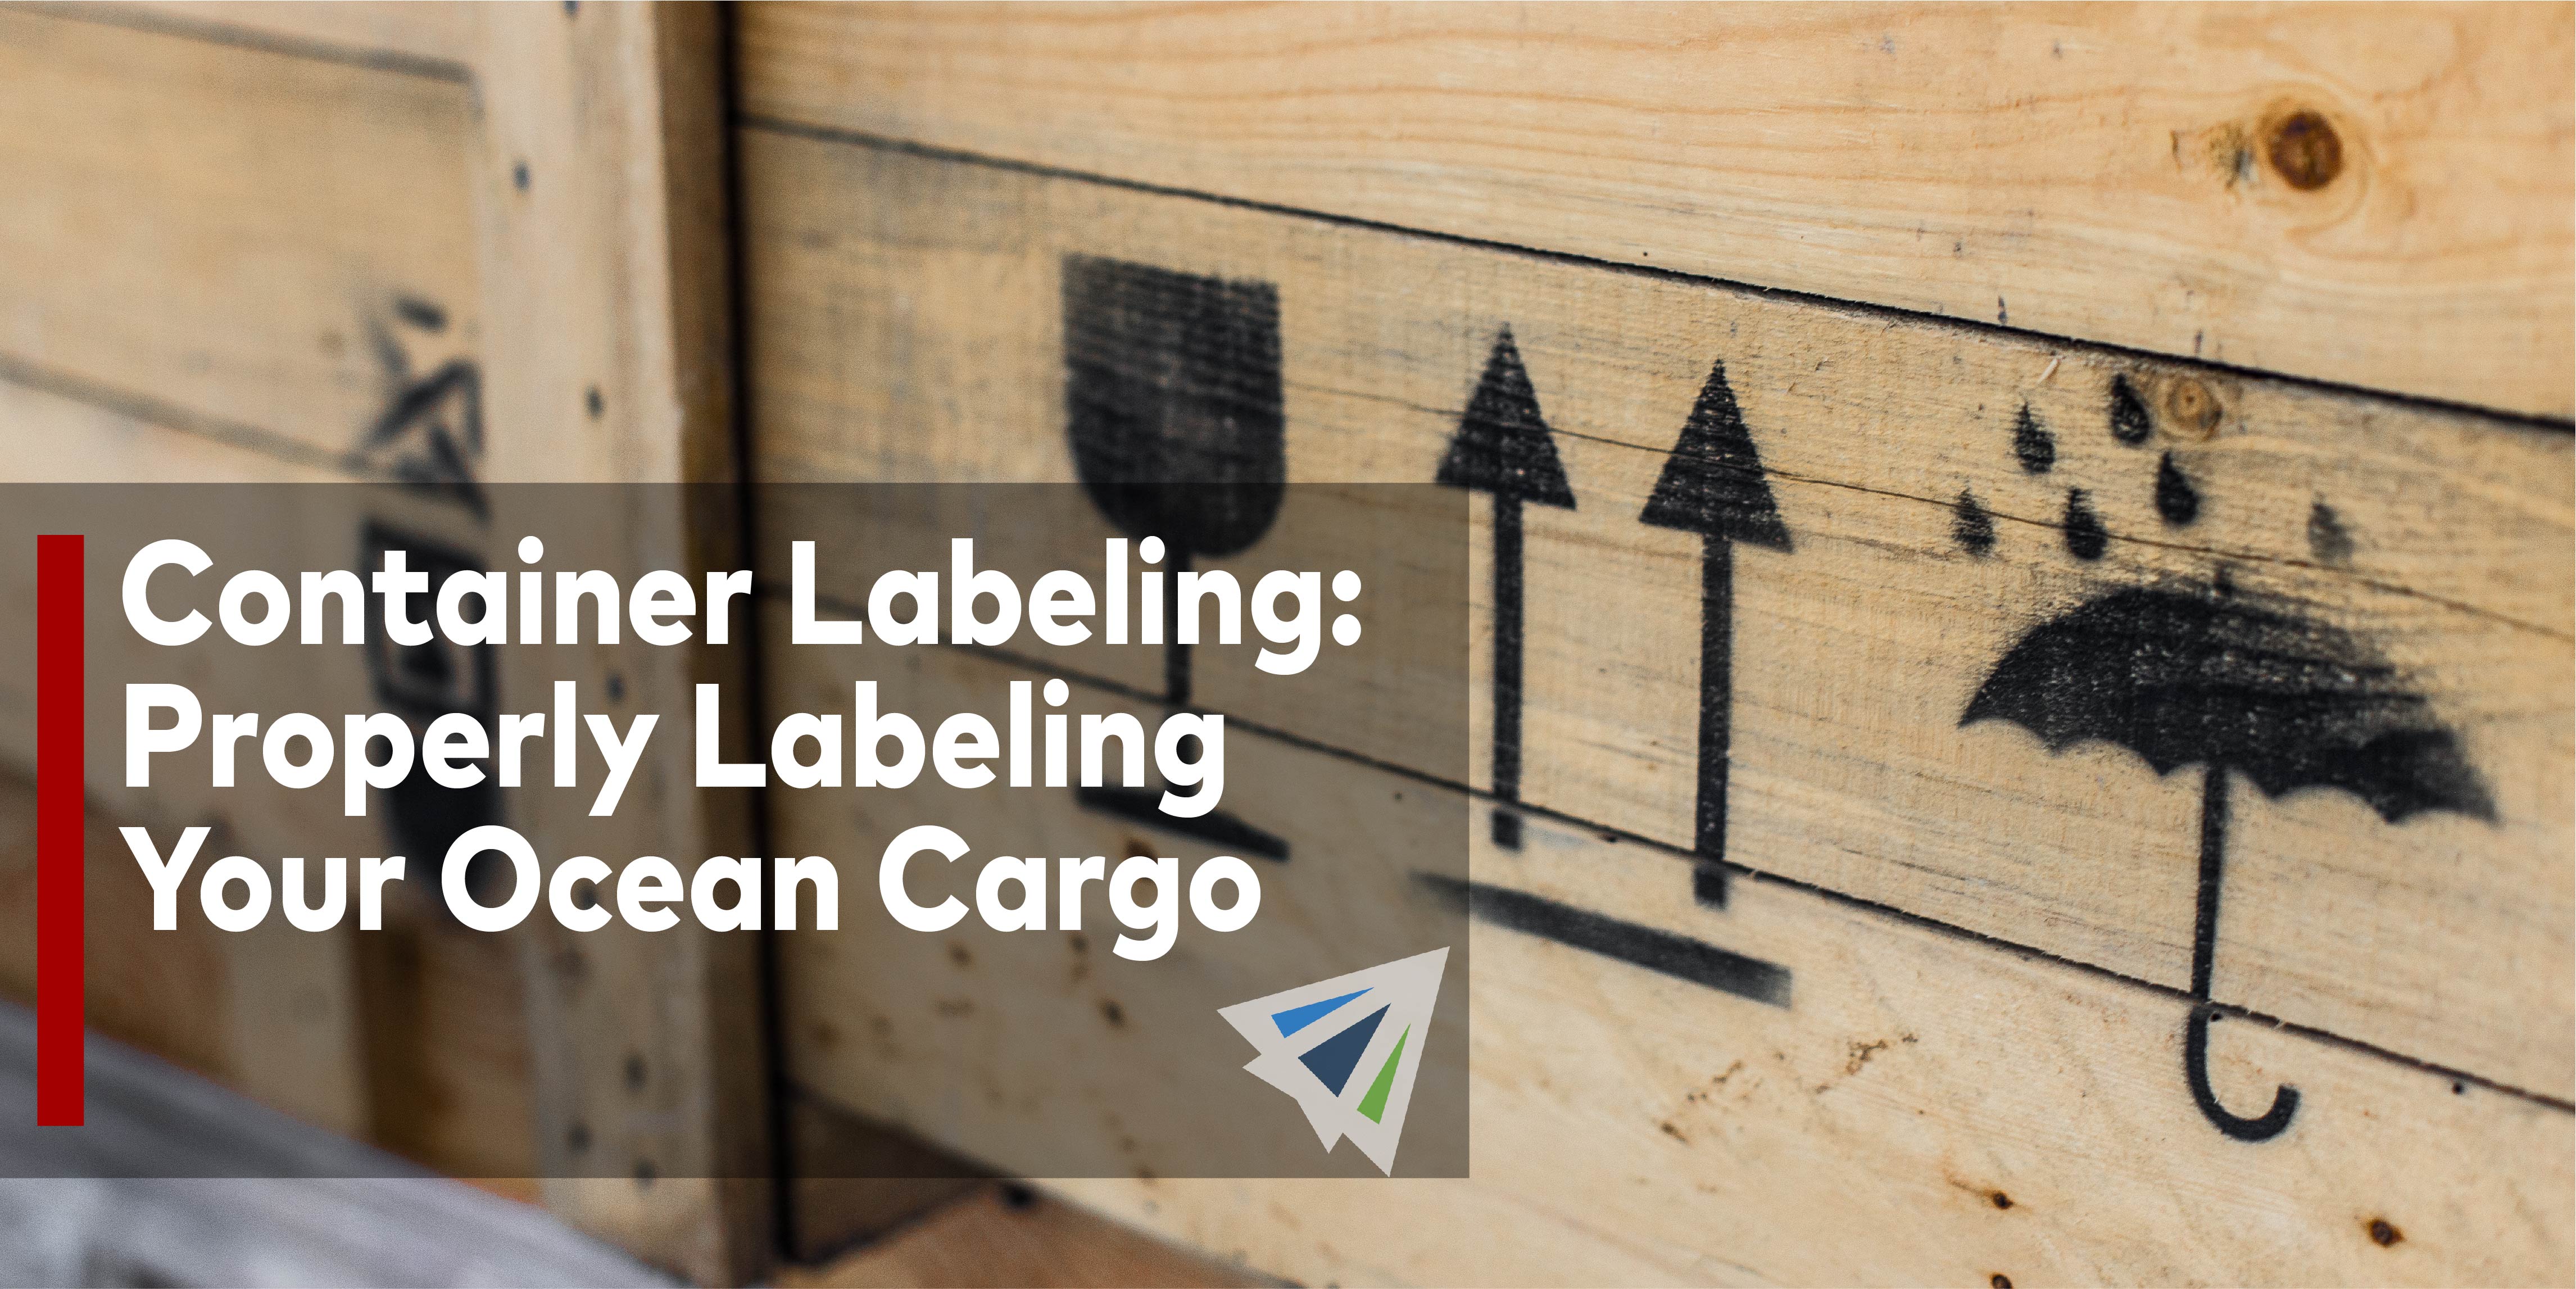 Container Labeling- Properly Labeling Your Ocean Cargo